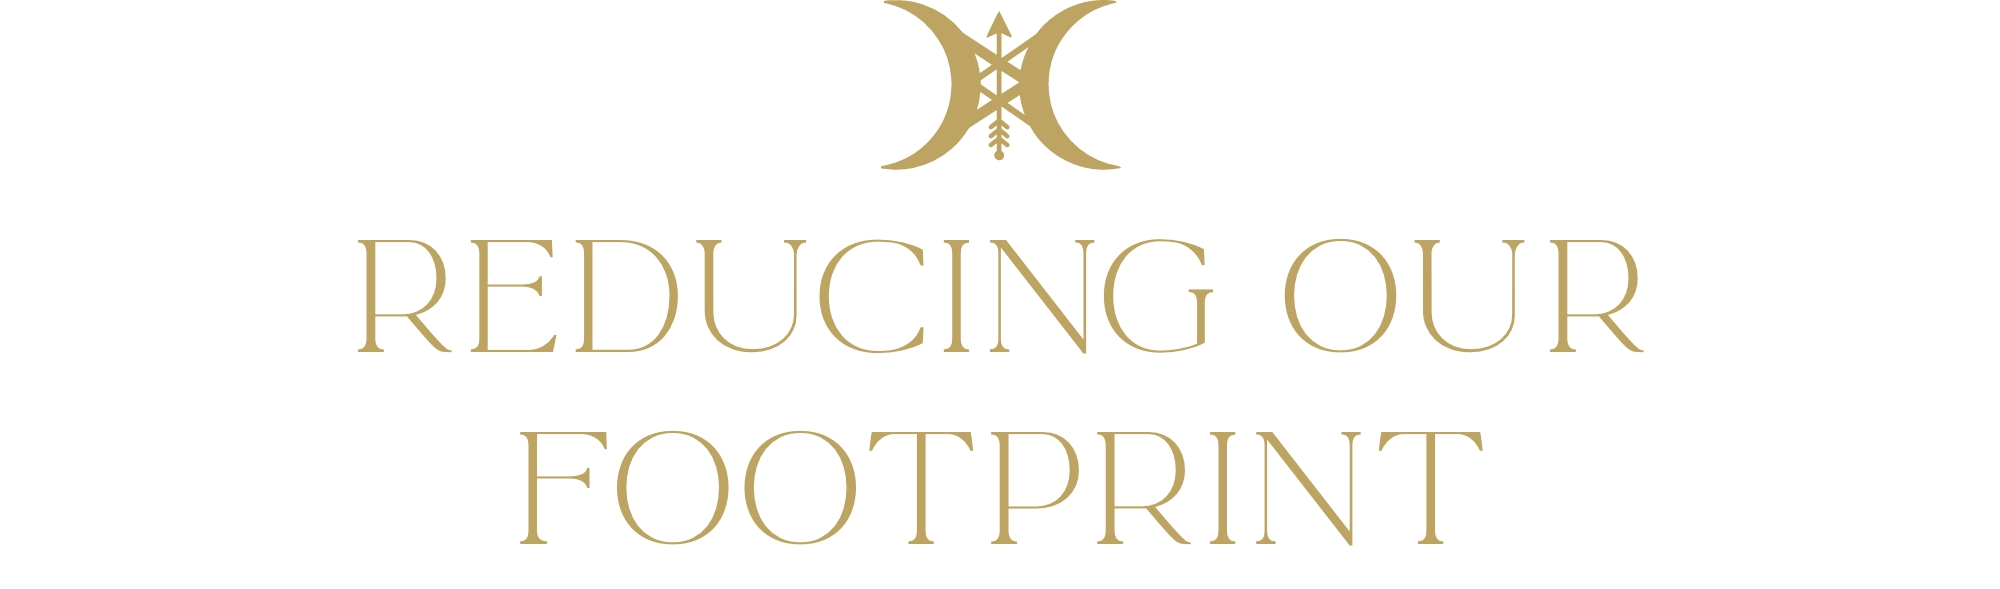 Reducing Our Footprint